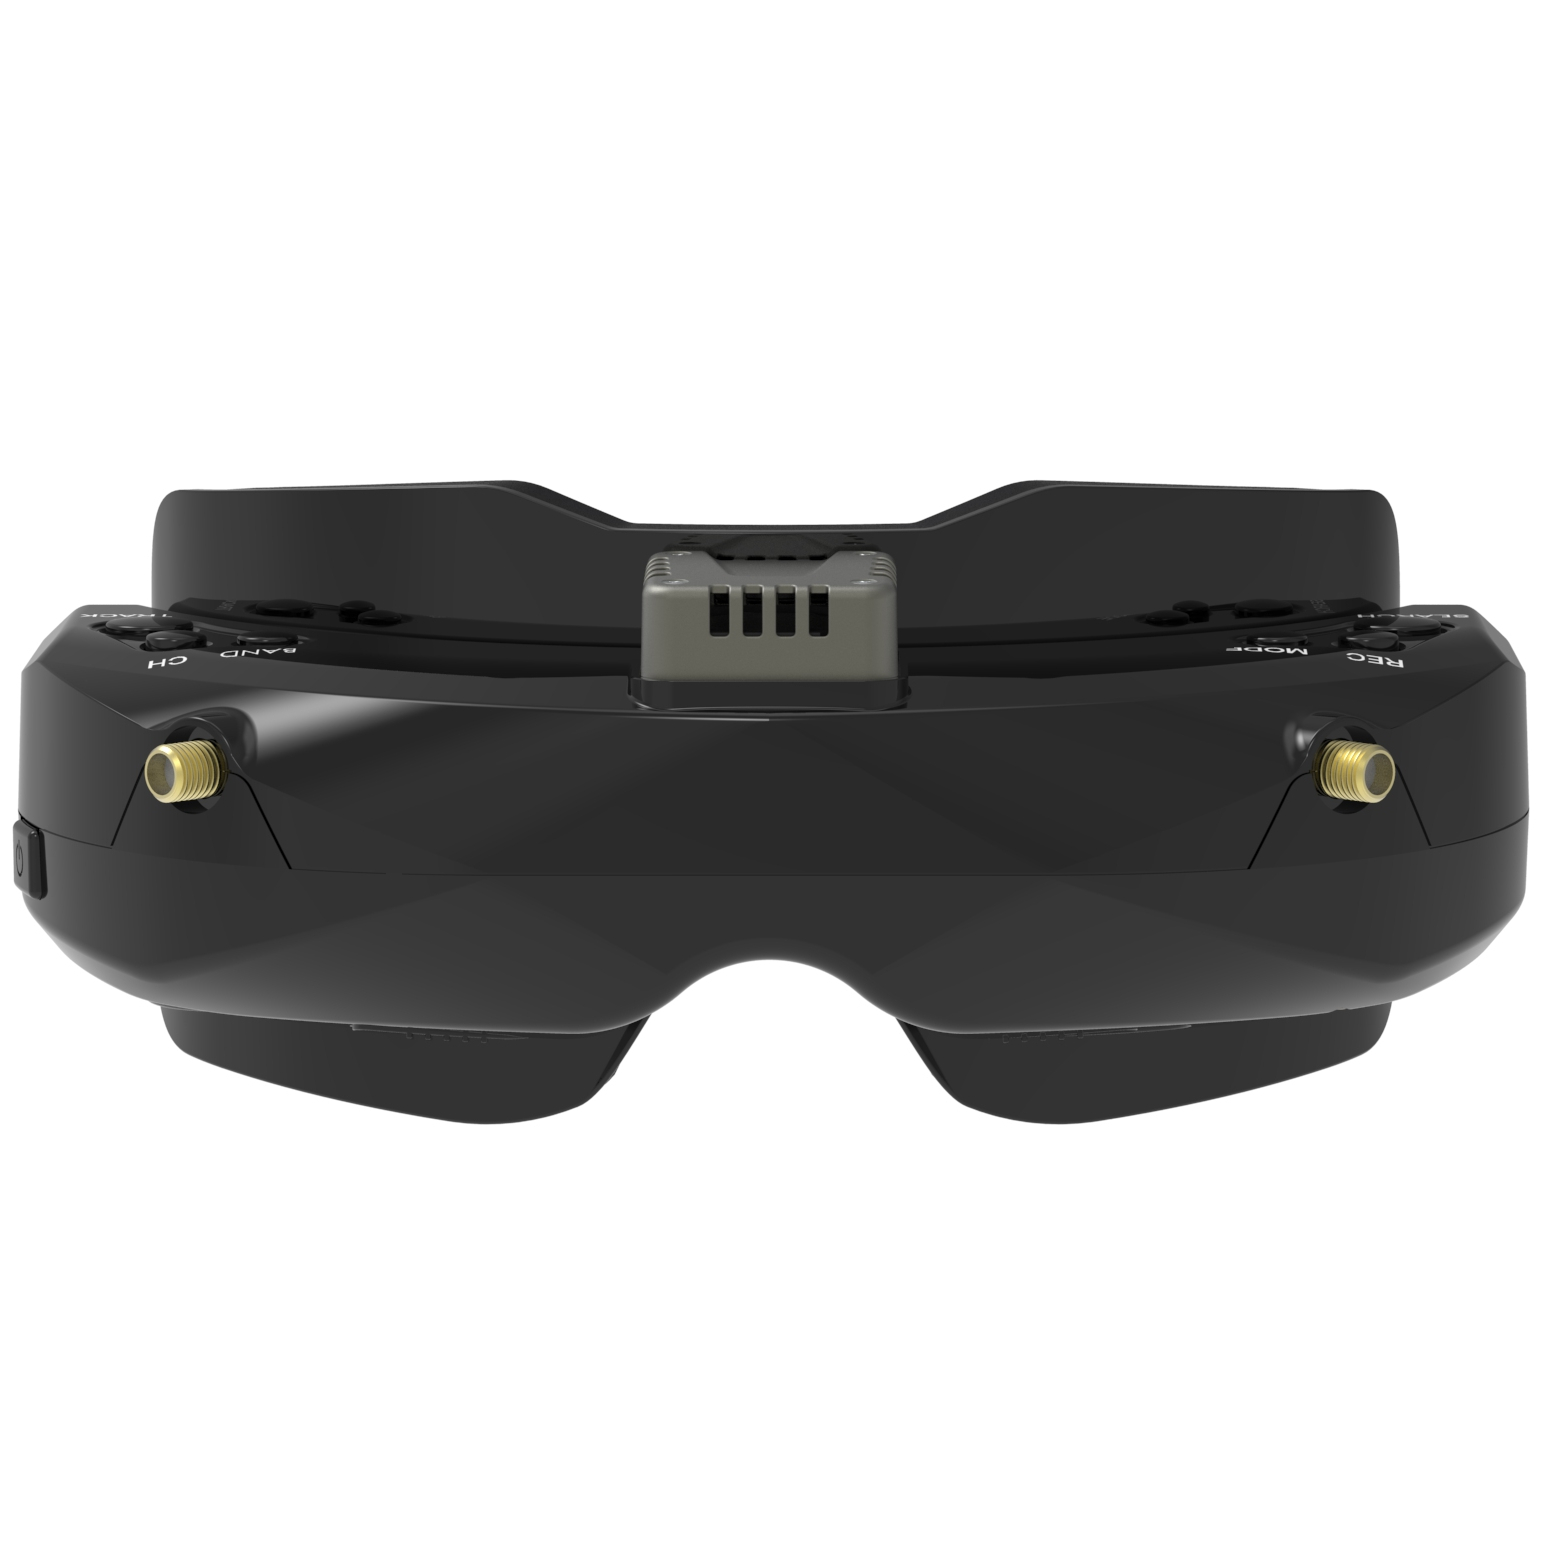 SKYZONE SKY02O FPV Goggles OLED 5.8Ghz SteadyView Diversity RX Built in HeadTracker DVR HDMI AVIN/OUT for RC Racing Drone 3